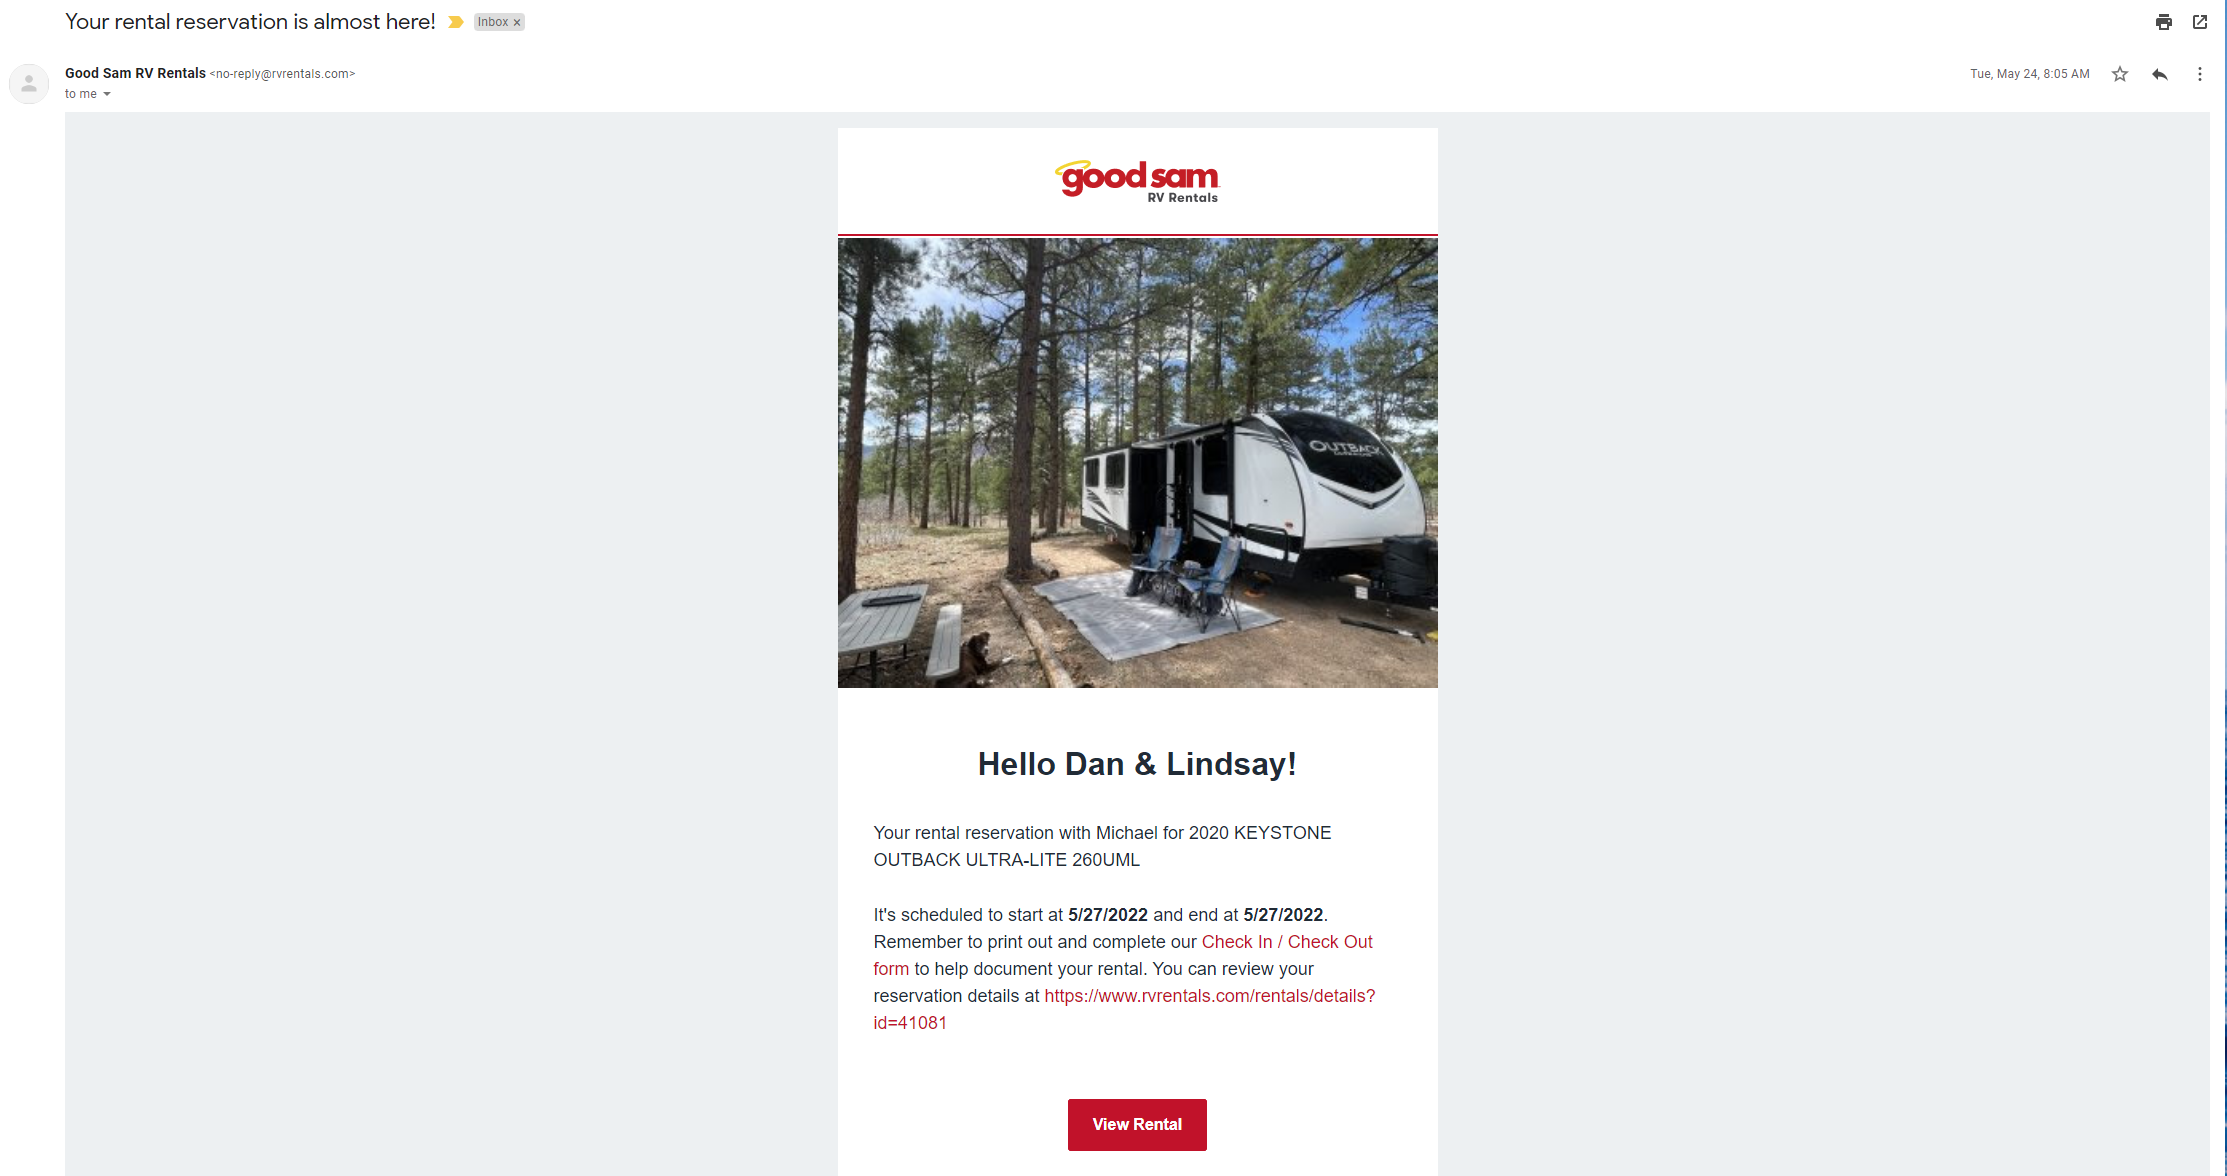 Message indicating confirmation of RV rental.